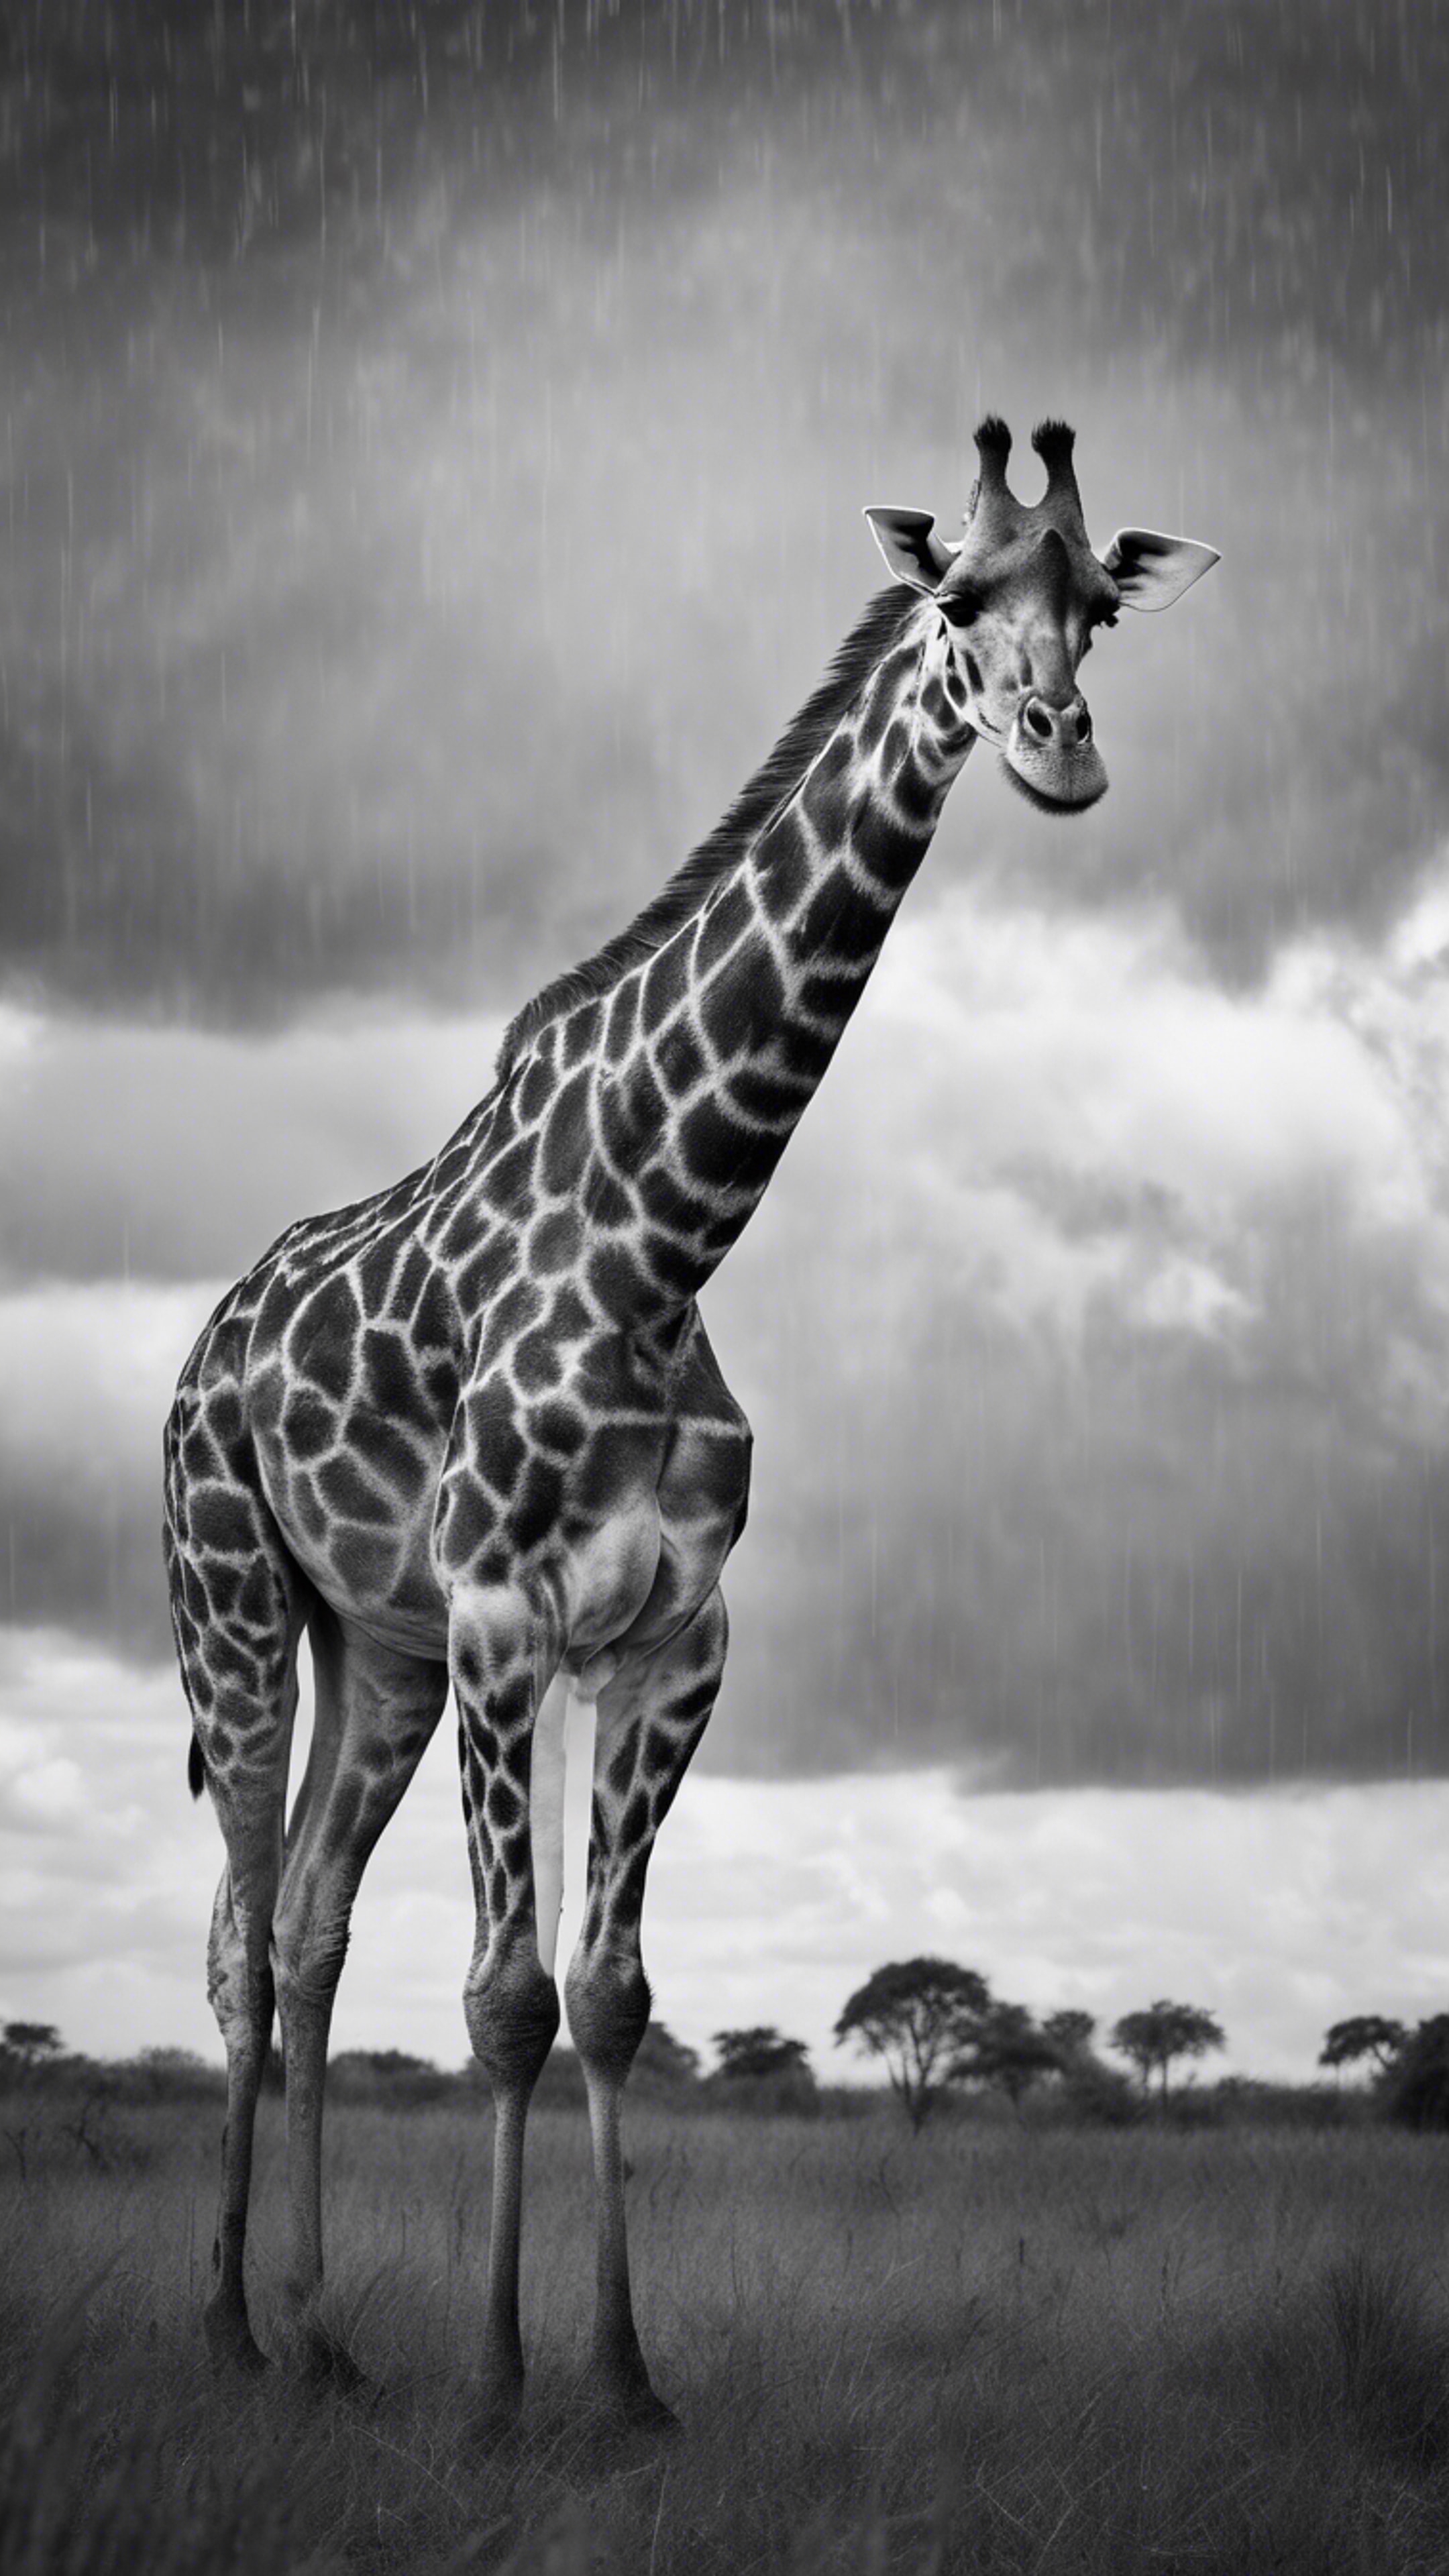 A beautifully photographed black and white image of a giraffe sauntering under rain clouds. 벽지[33f5eecce55b4c40952e]